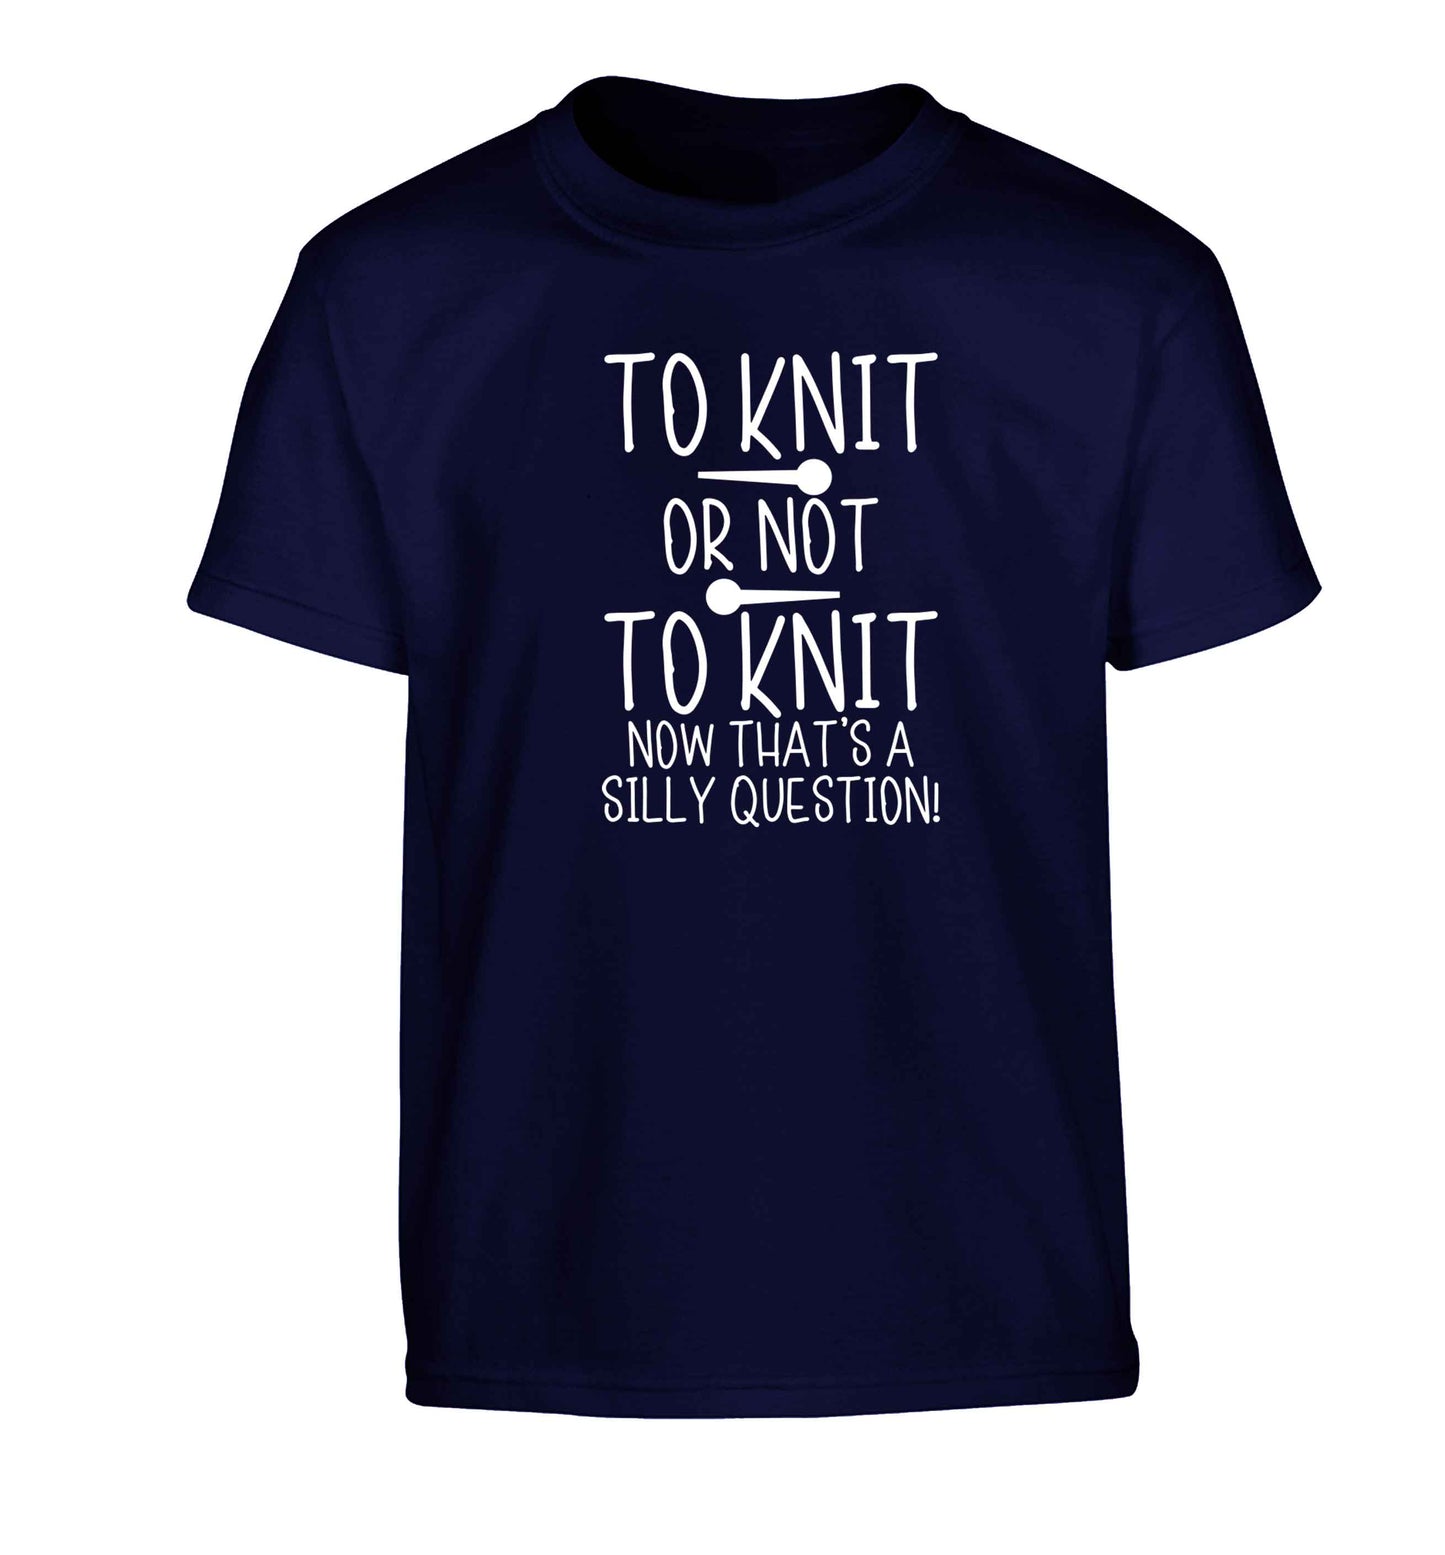 To knit or not to knit now that's a silly question Children's navy Tshirt 12-13 Years